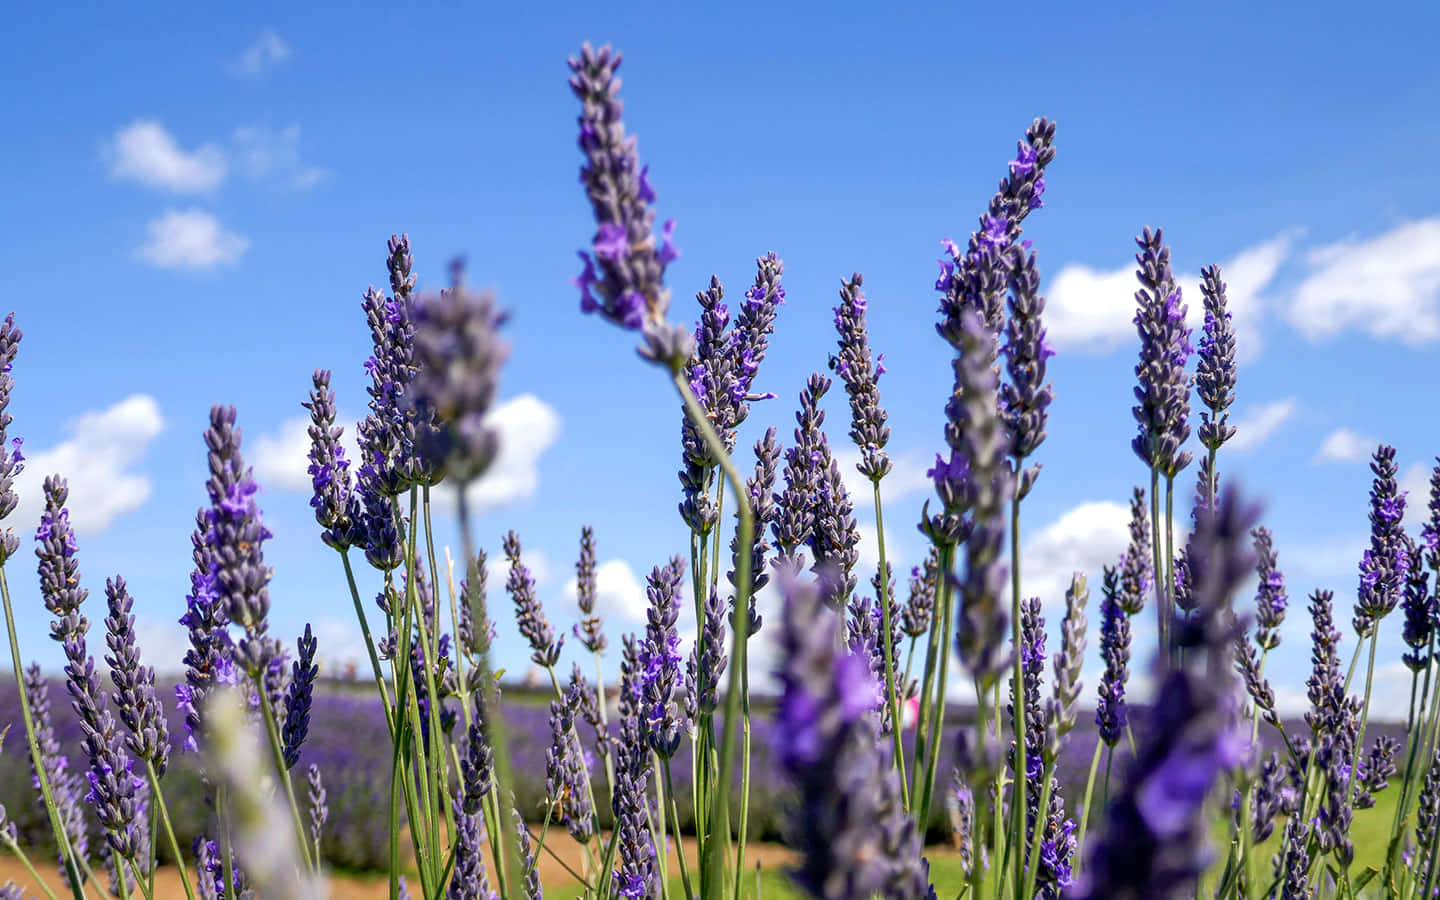 Take in the beauty of a Lavender Field